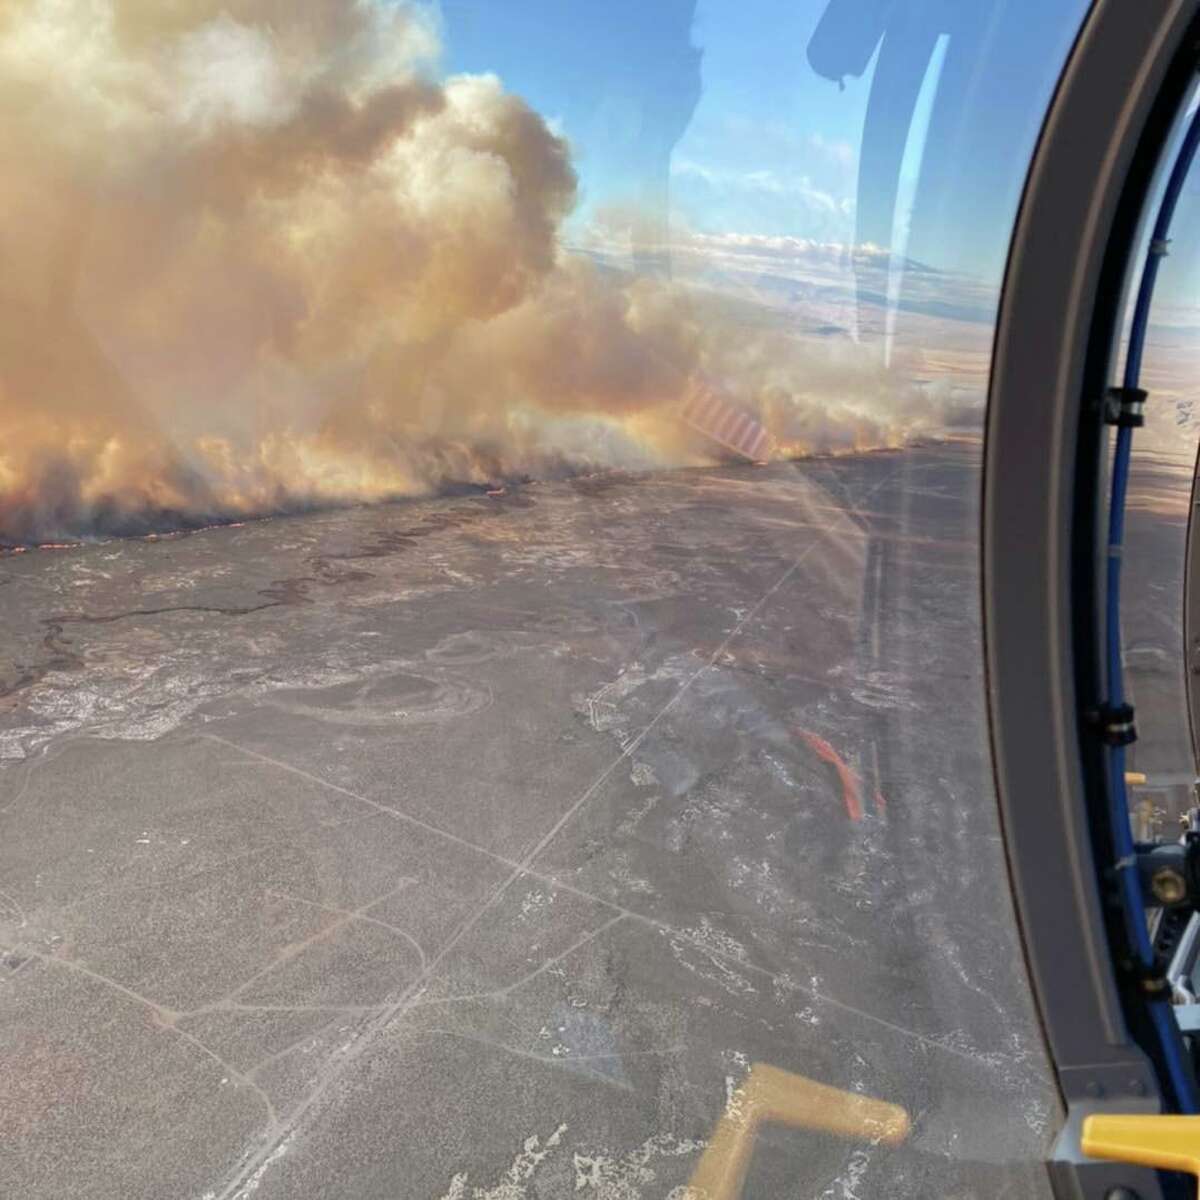 The Airport Fire in Owens Valley had grown to 1,500 acres in size within a few hours of sparking Wednesday.